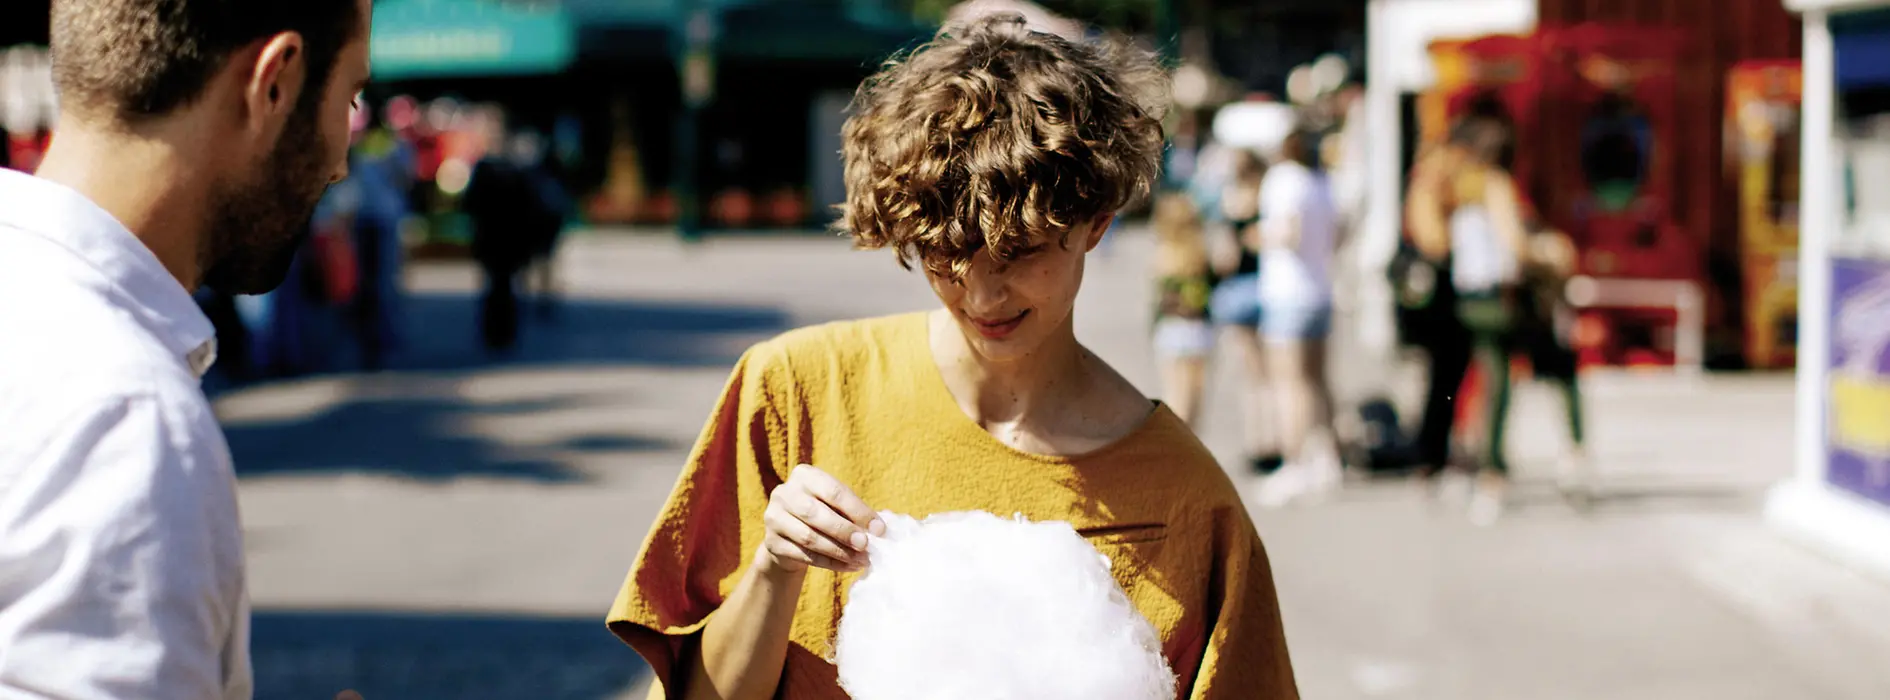 Prater: young woman eating cotton candy